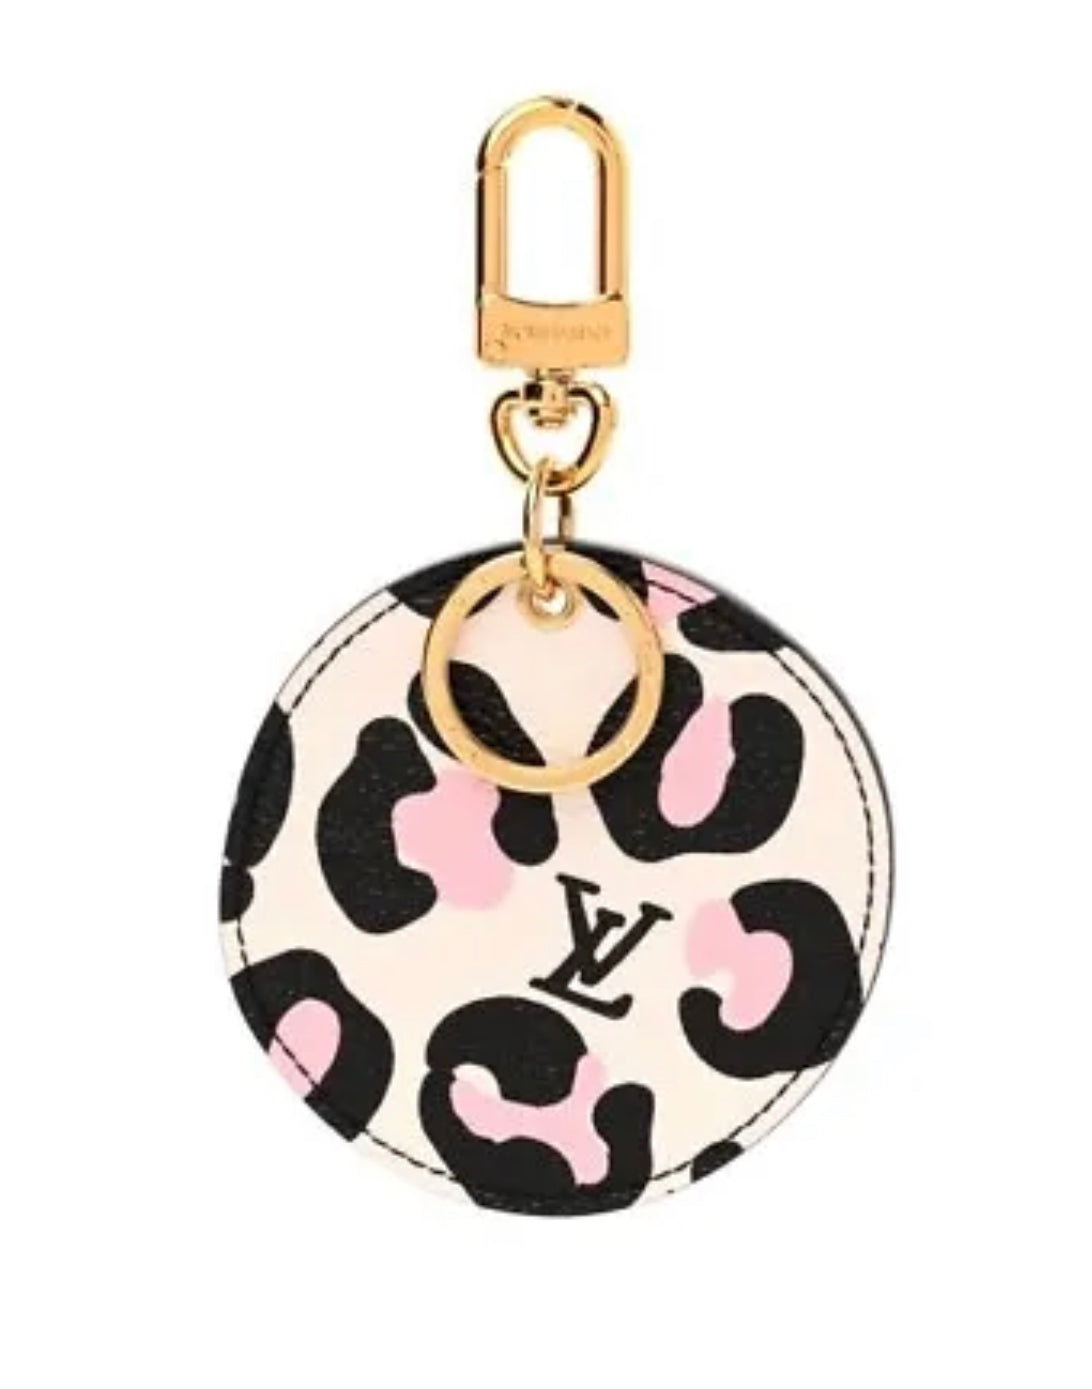 Louis Vuitton ILLUSTRE Resort Key Ring and Bag Charm Pink Canvas